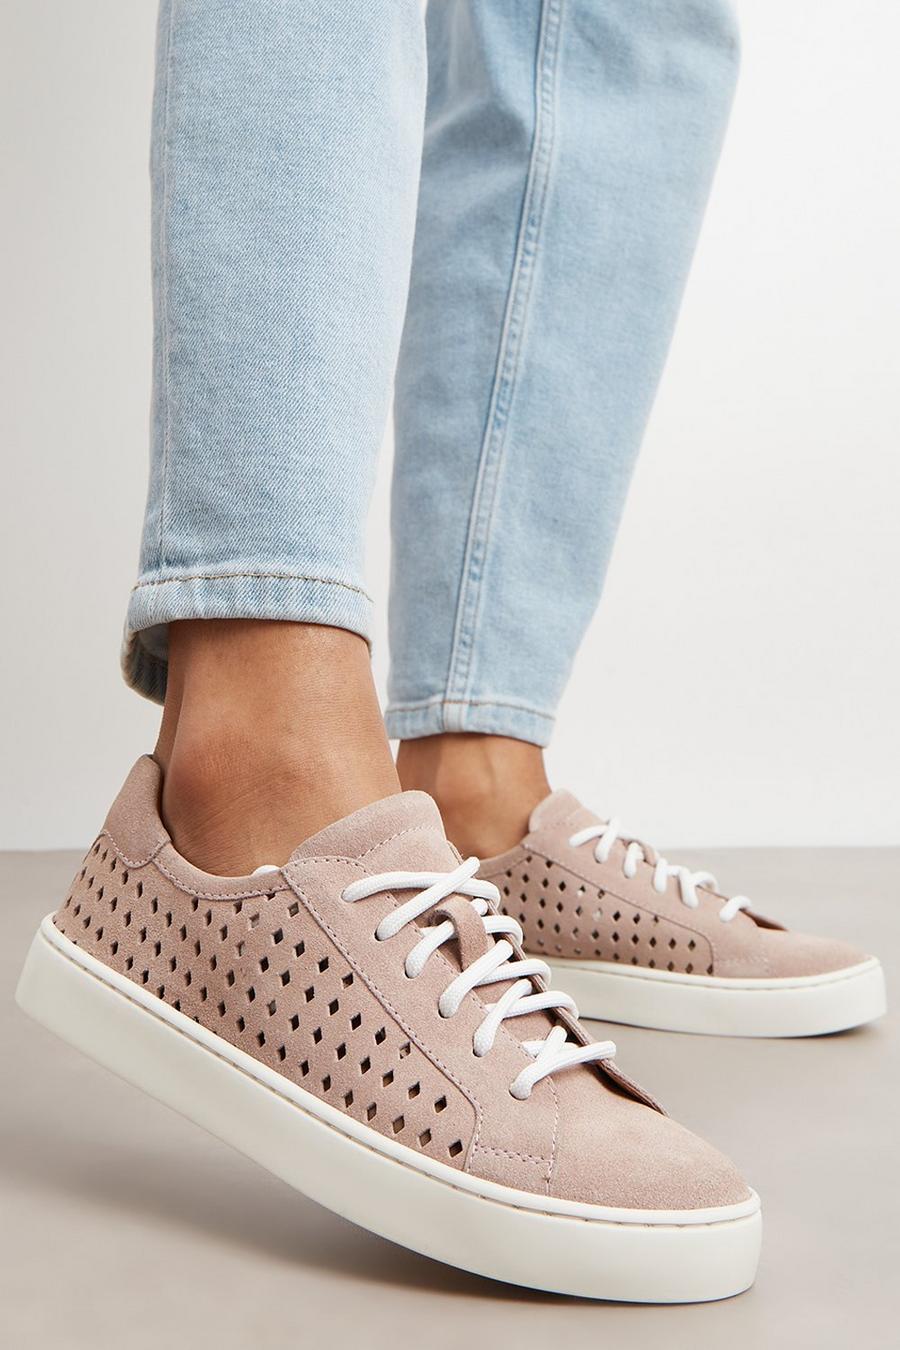 Principles: Charlotte Leather Perforated Trainer